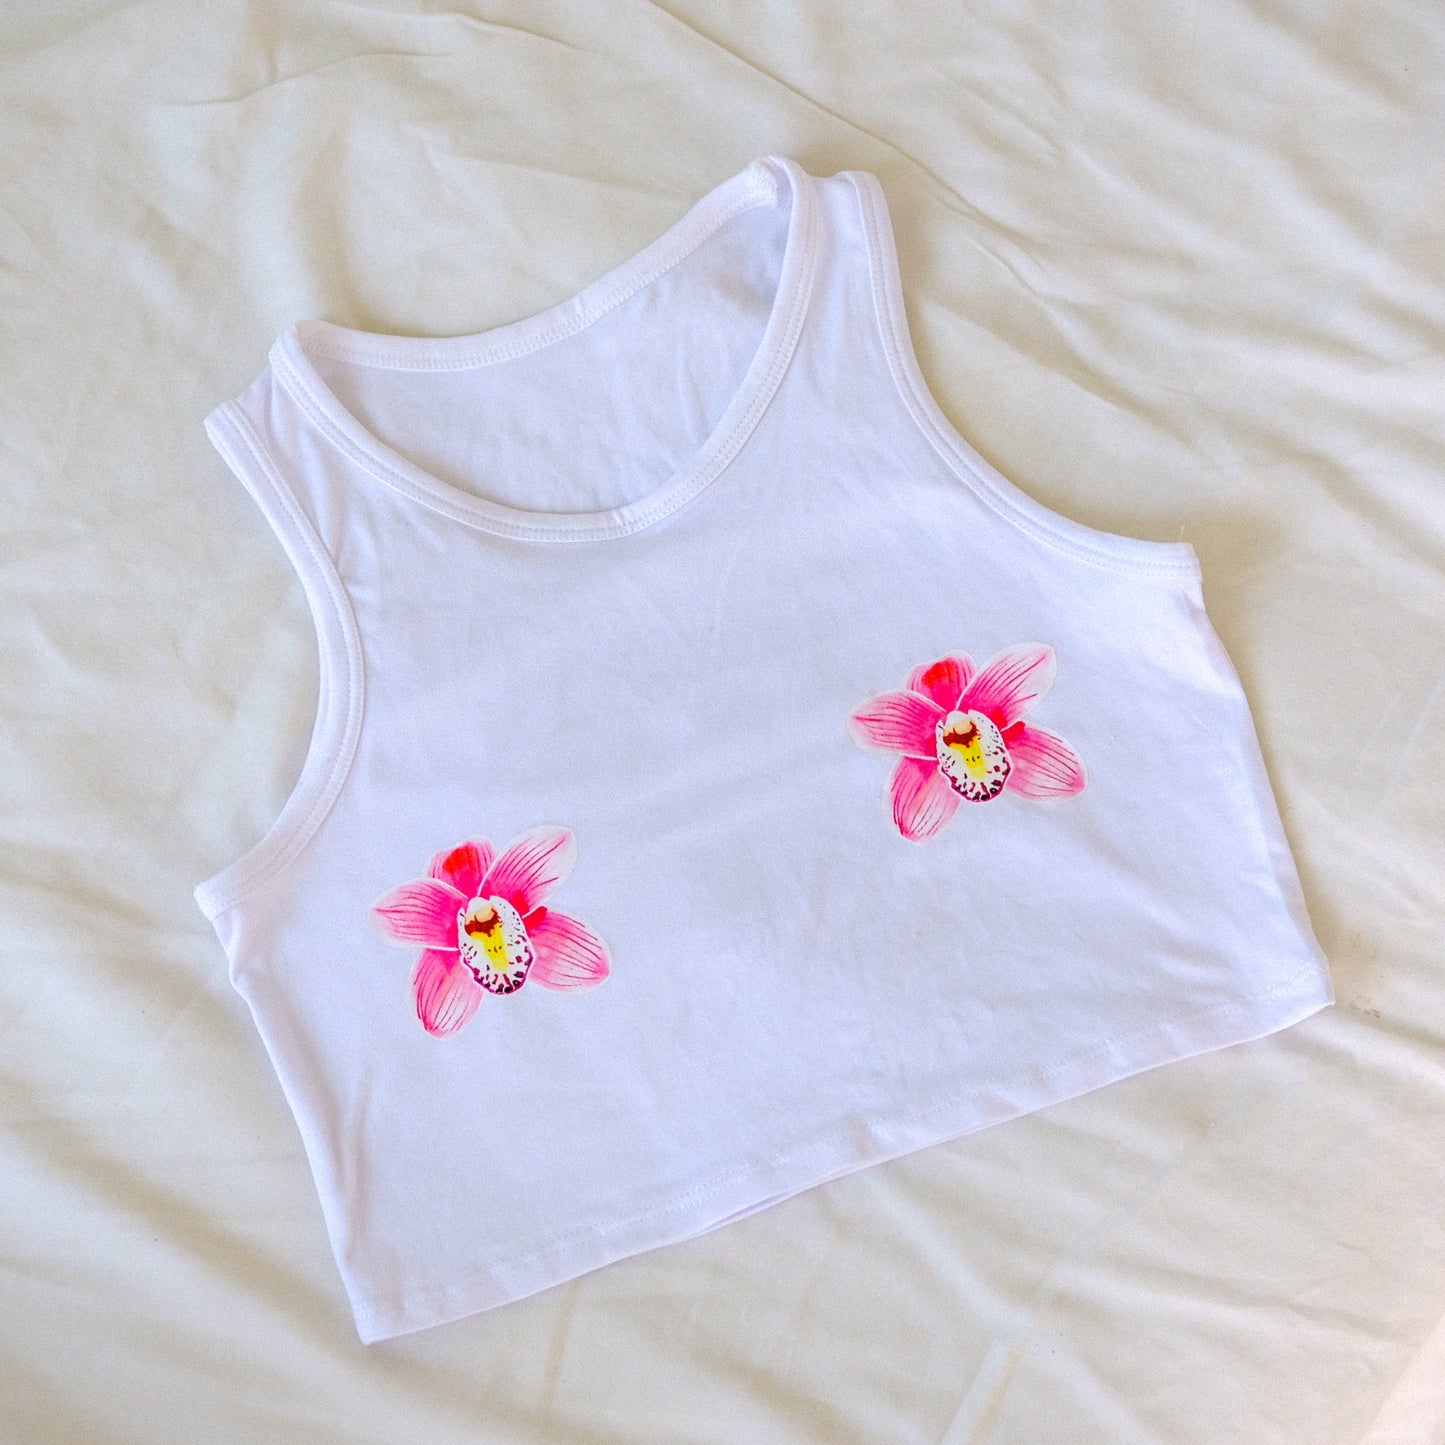 free the orchids top